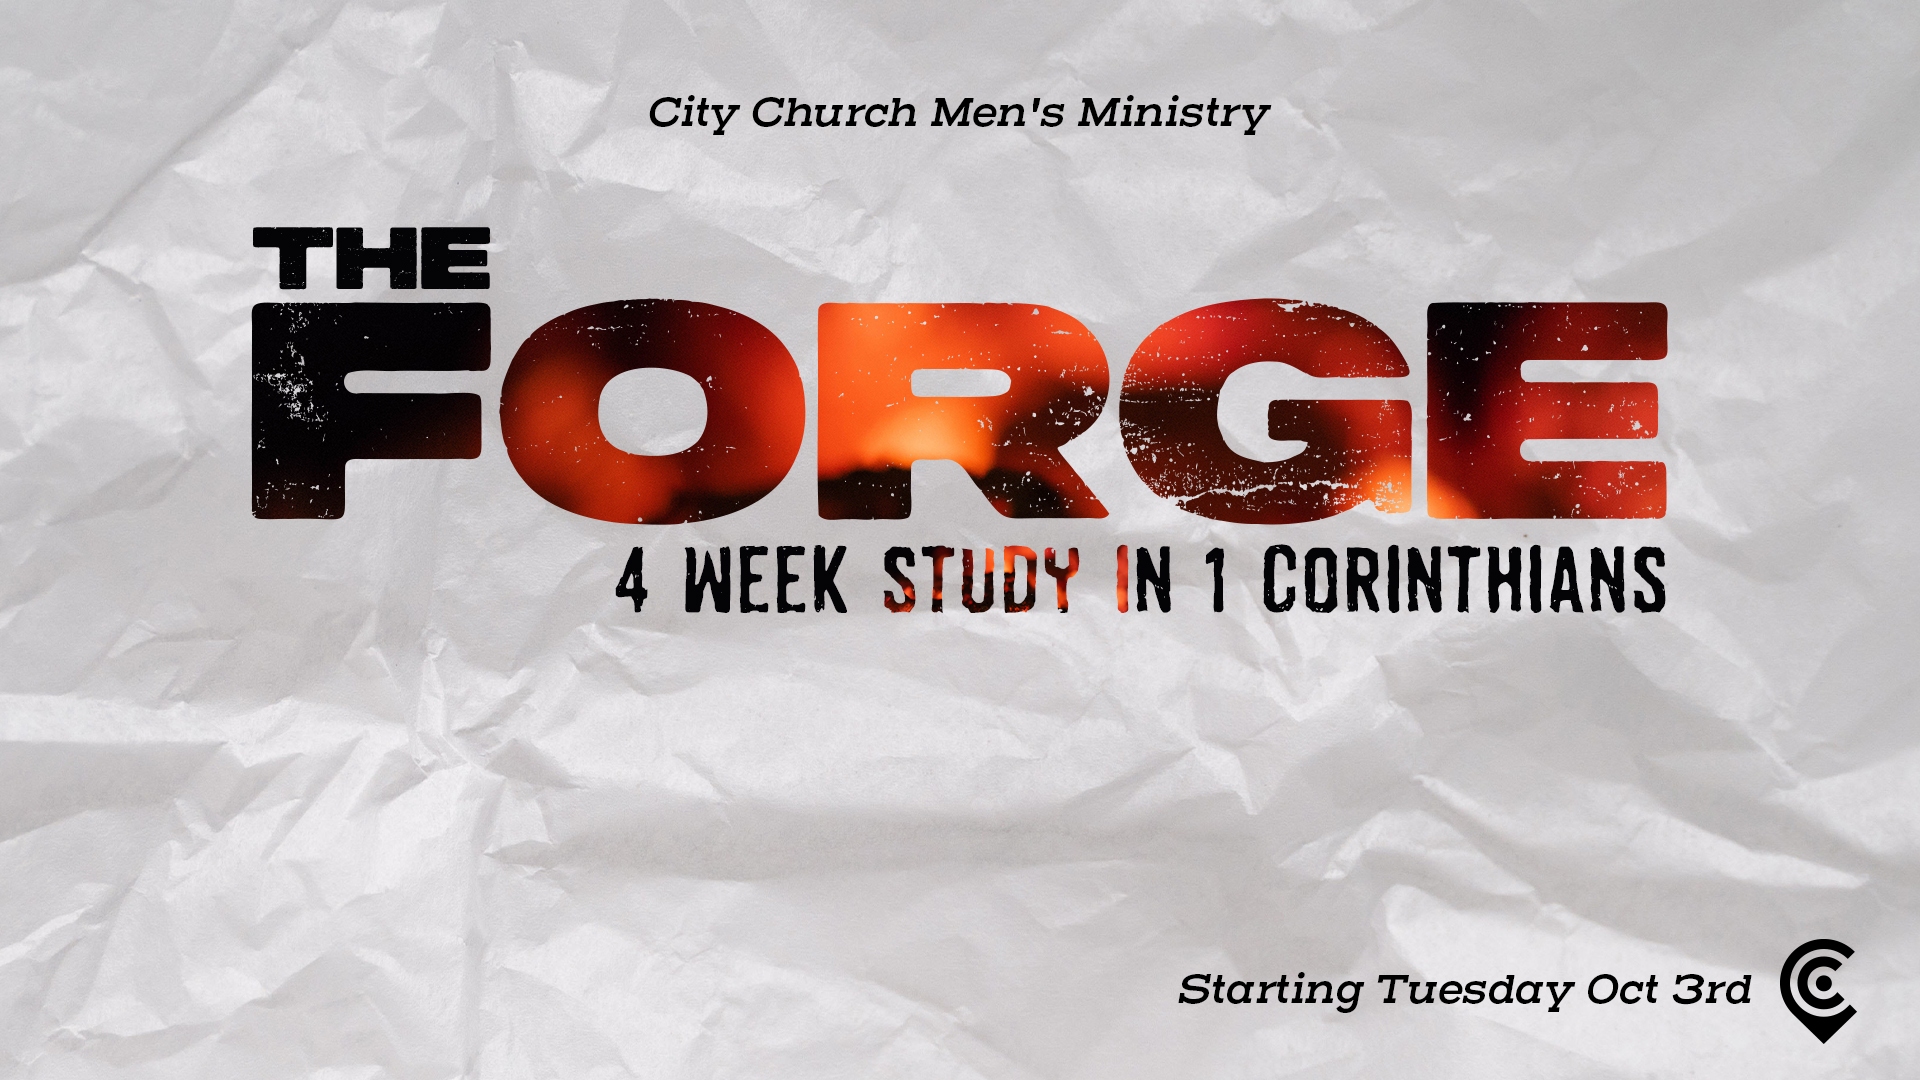 Men: do you have a desire to be alert, to stand firm in the faith, to act like a man and be strong?
<br><br>
Then come to The FORGE!
The FORGE will be four amazing weeks of food, fellowship and faith.
<a href="https://citychurchmelissa.churchcenter.com/registrations/events/1878695">REGISTER HERE</A>